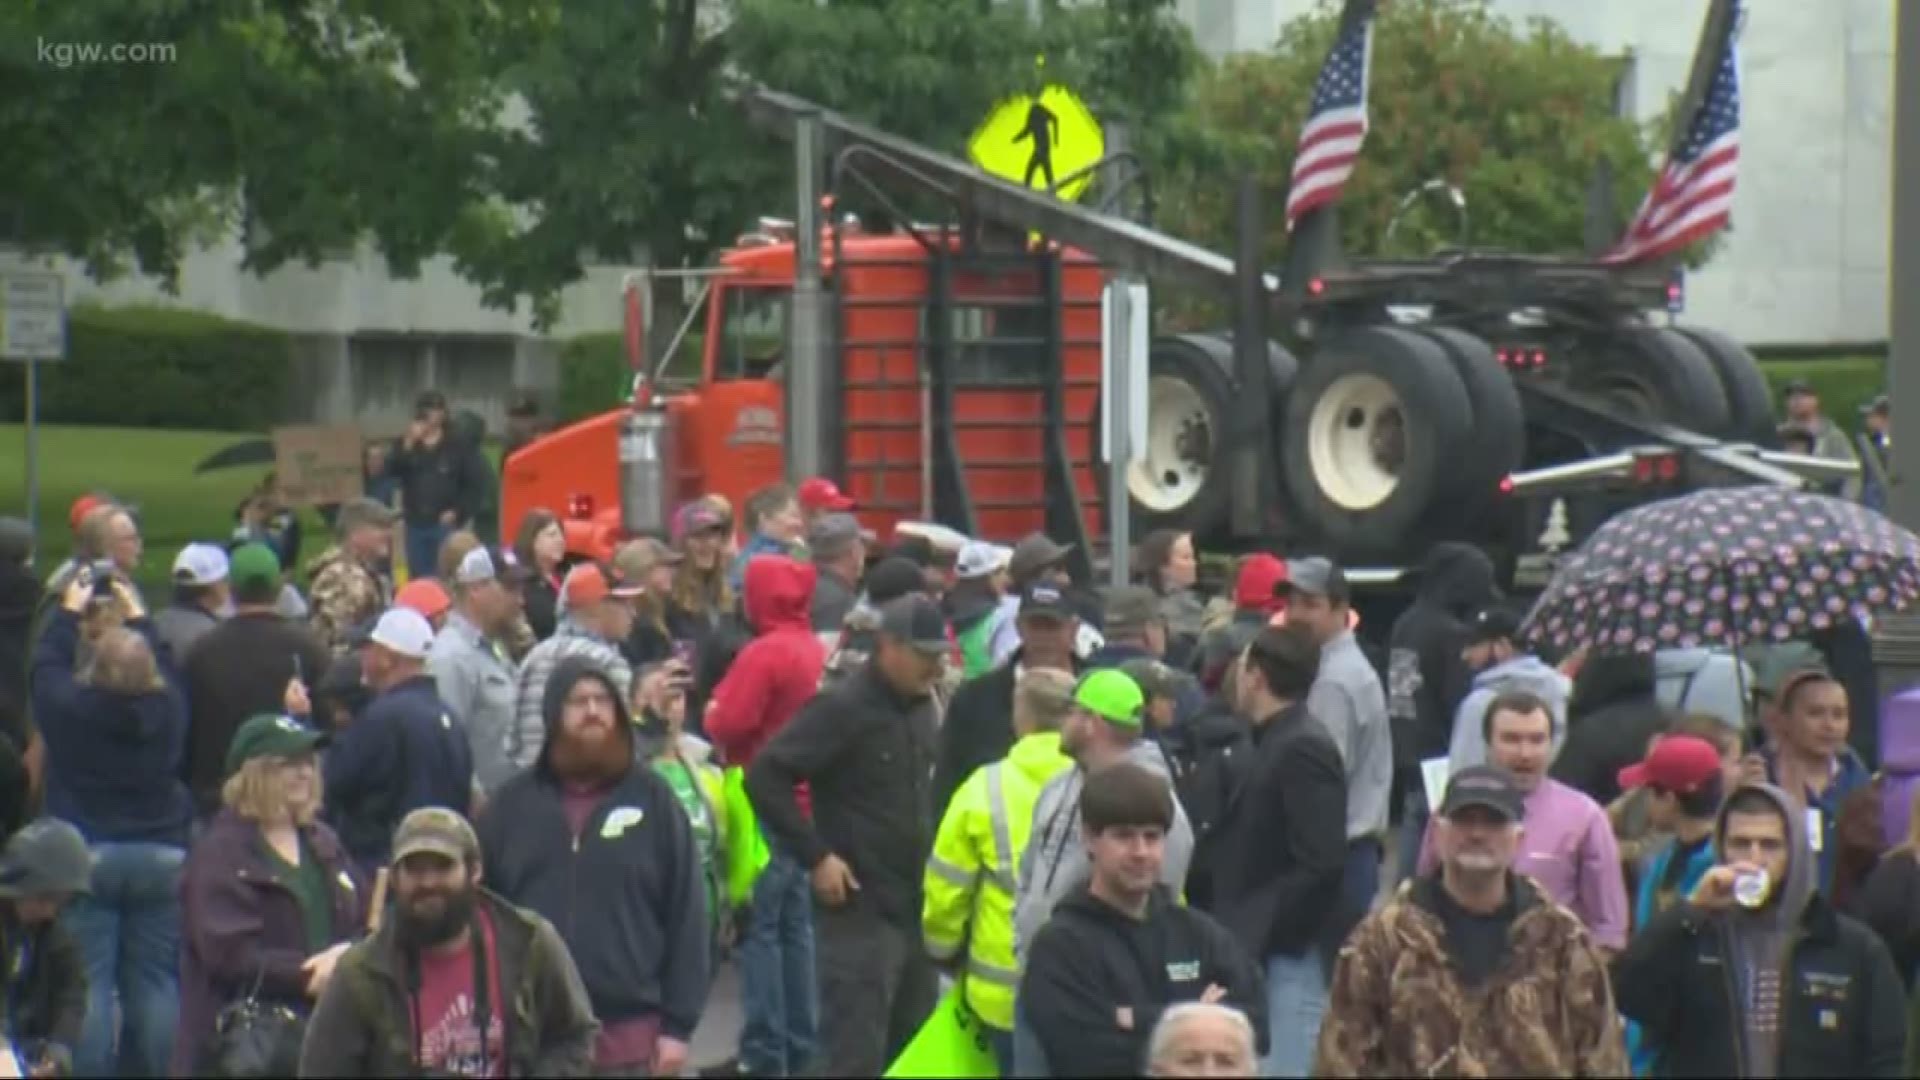 Loggers, truckers and farmer from across the state of Oregon gathered in Salem on Thursday to protest the controversial HB 2020 cap-and-trade bill.